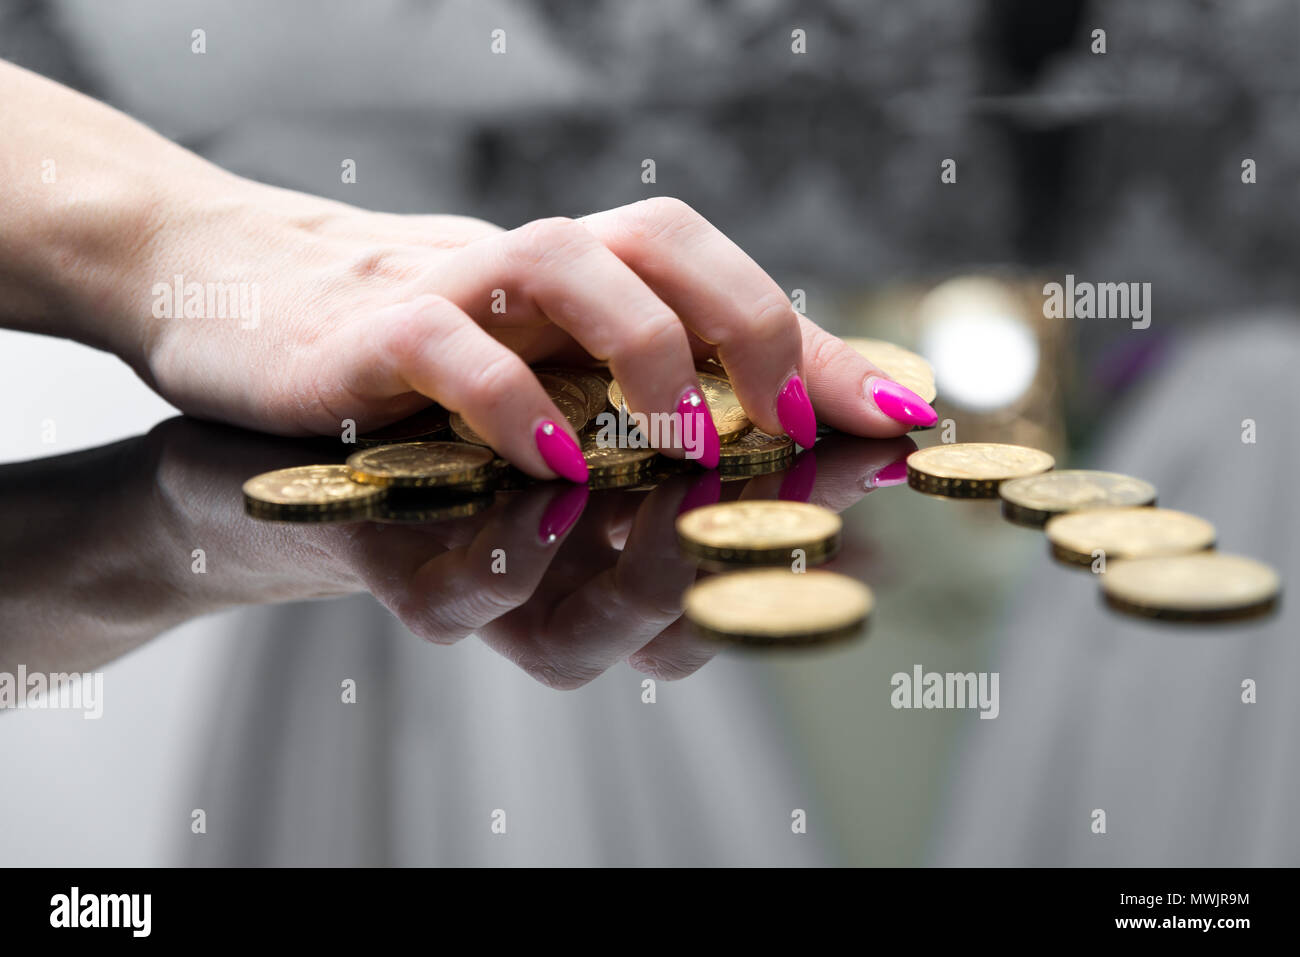 Concept of enrichment and financial growth. Gold coins. Female working hard, saving money. Income Tax Raise. Feminine hand held over golden coins arra Stock Photo